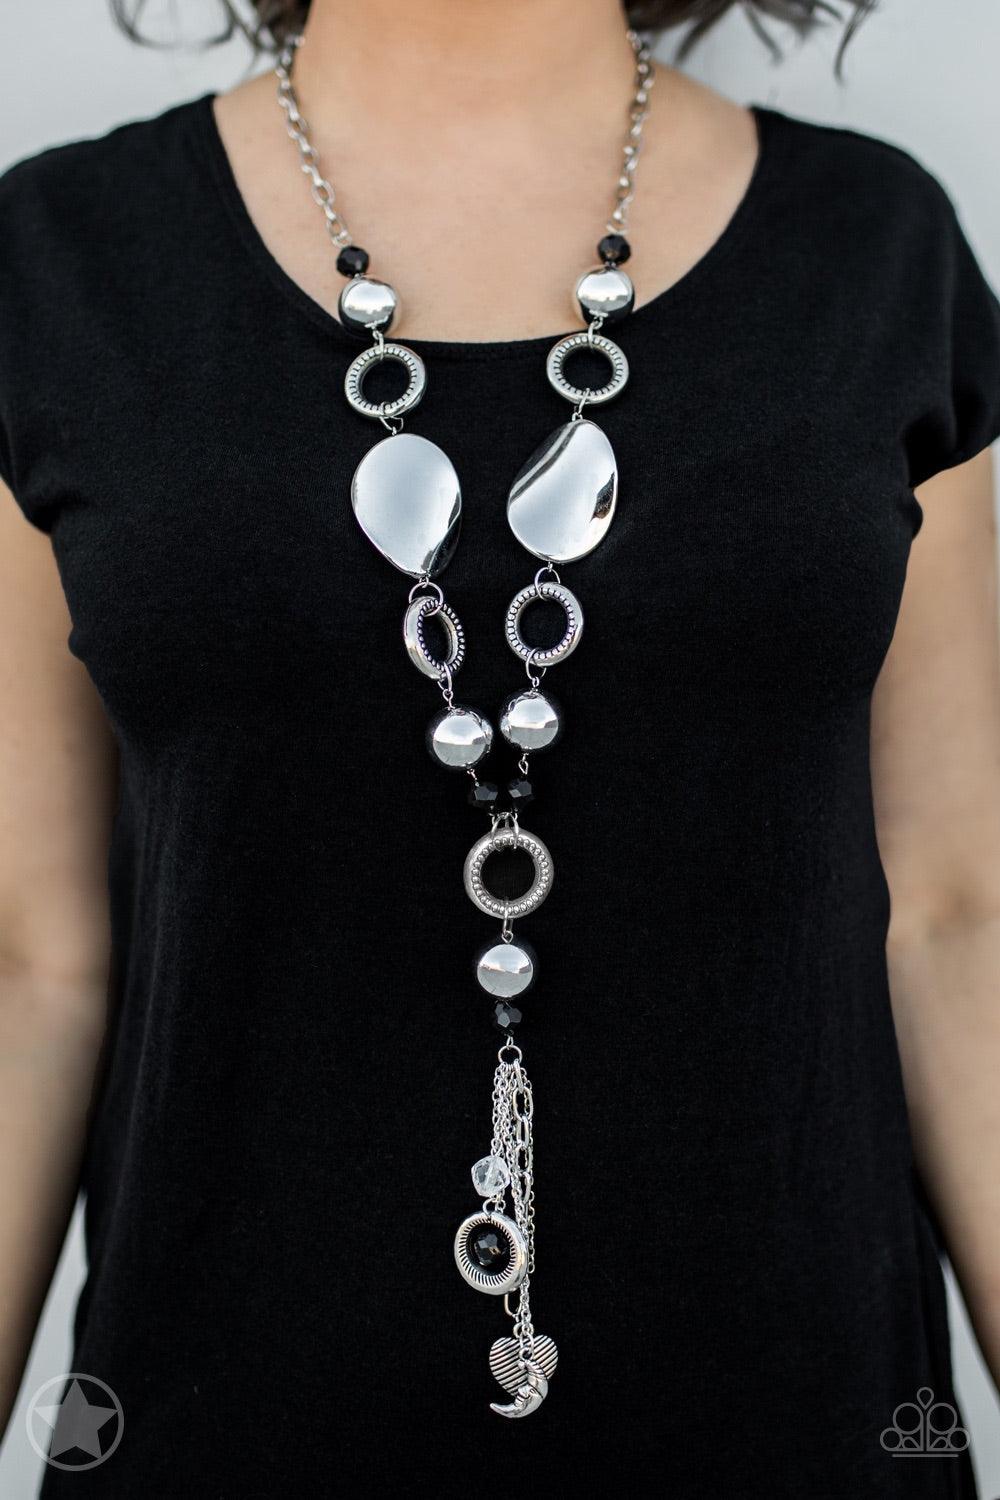 Paparazzi Accessories Total Eclipse Of The Heart - Silver Long chain of black crystalized beads, curved plates of silver with a pearly finish, and chunky silver rings lead down to a tassel of chains and charms, including a crescent moon and a heart. Jewel